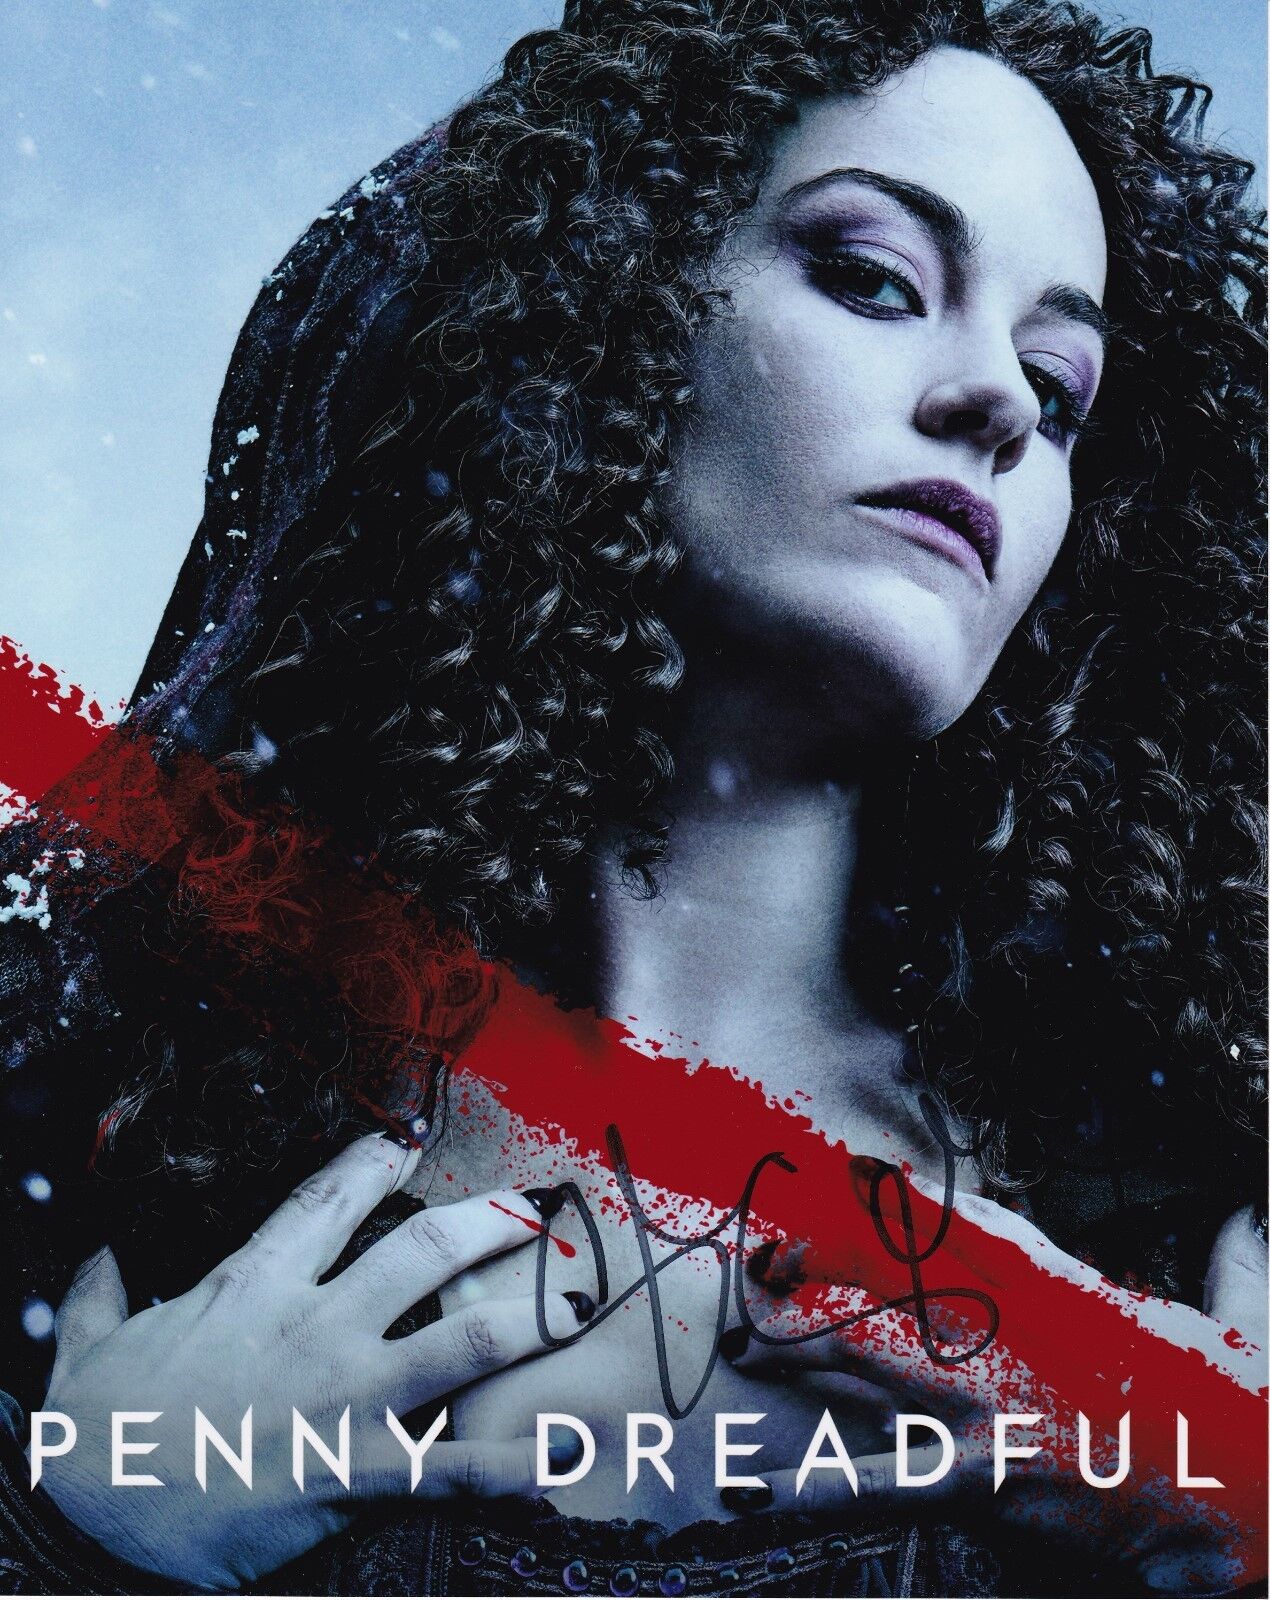 Sarah Greene ‘Penny Dreadful’ Autographed 8x10 Photo Poster painting with CoA & Signing Details